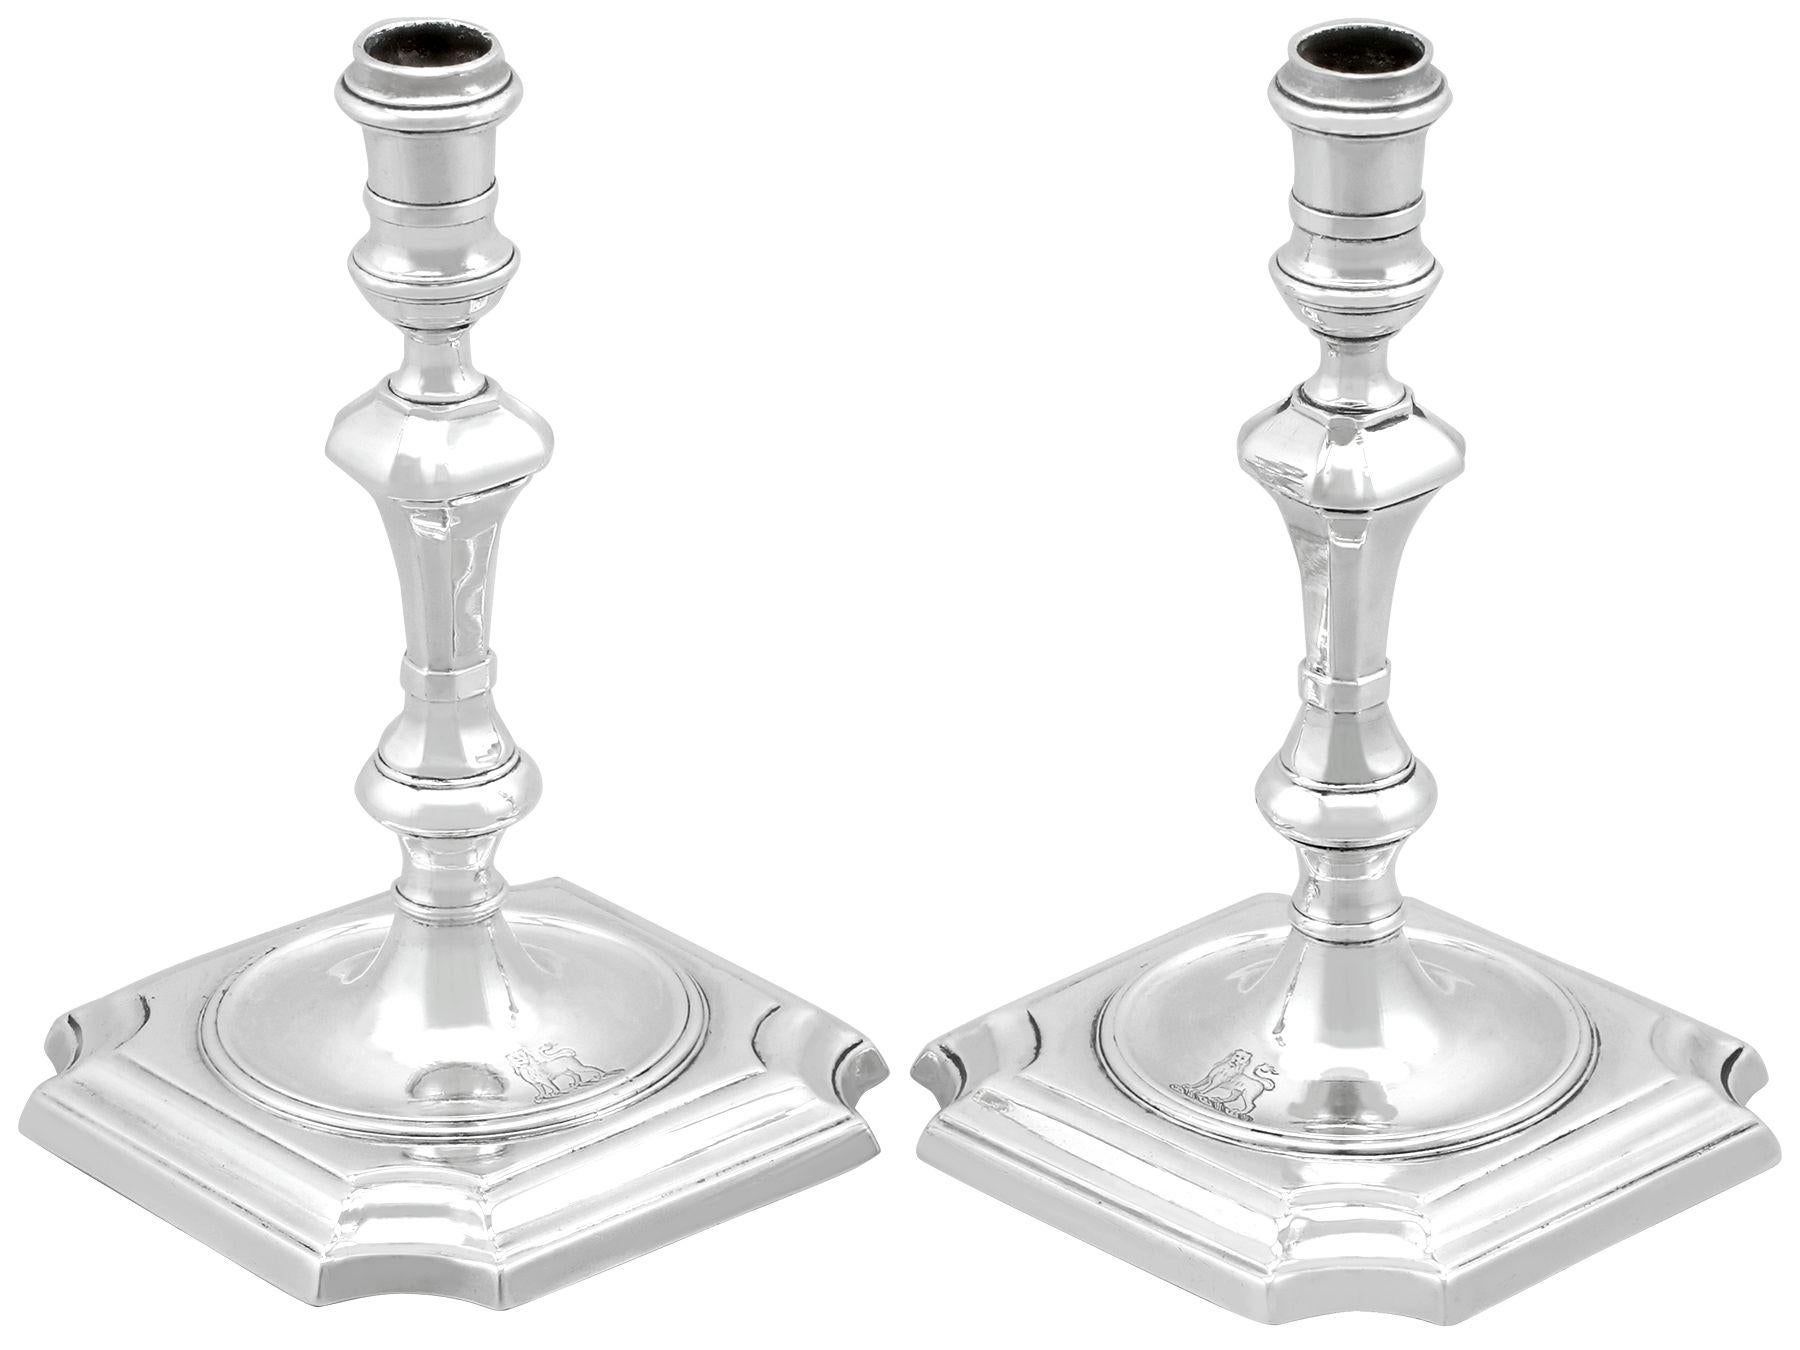 An exceptional, fine and impressive pair of antique George I English cast sterling silver tapersticks; an addition of our ornamental Georgian silverware collection

These exceptional antique George I cast sterling silver tapersticks have a plain